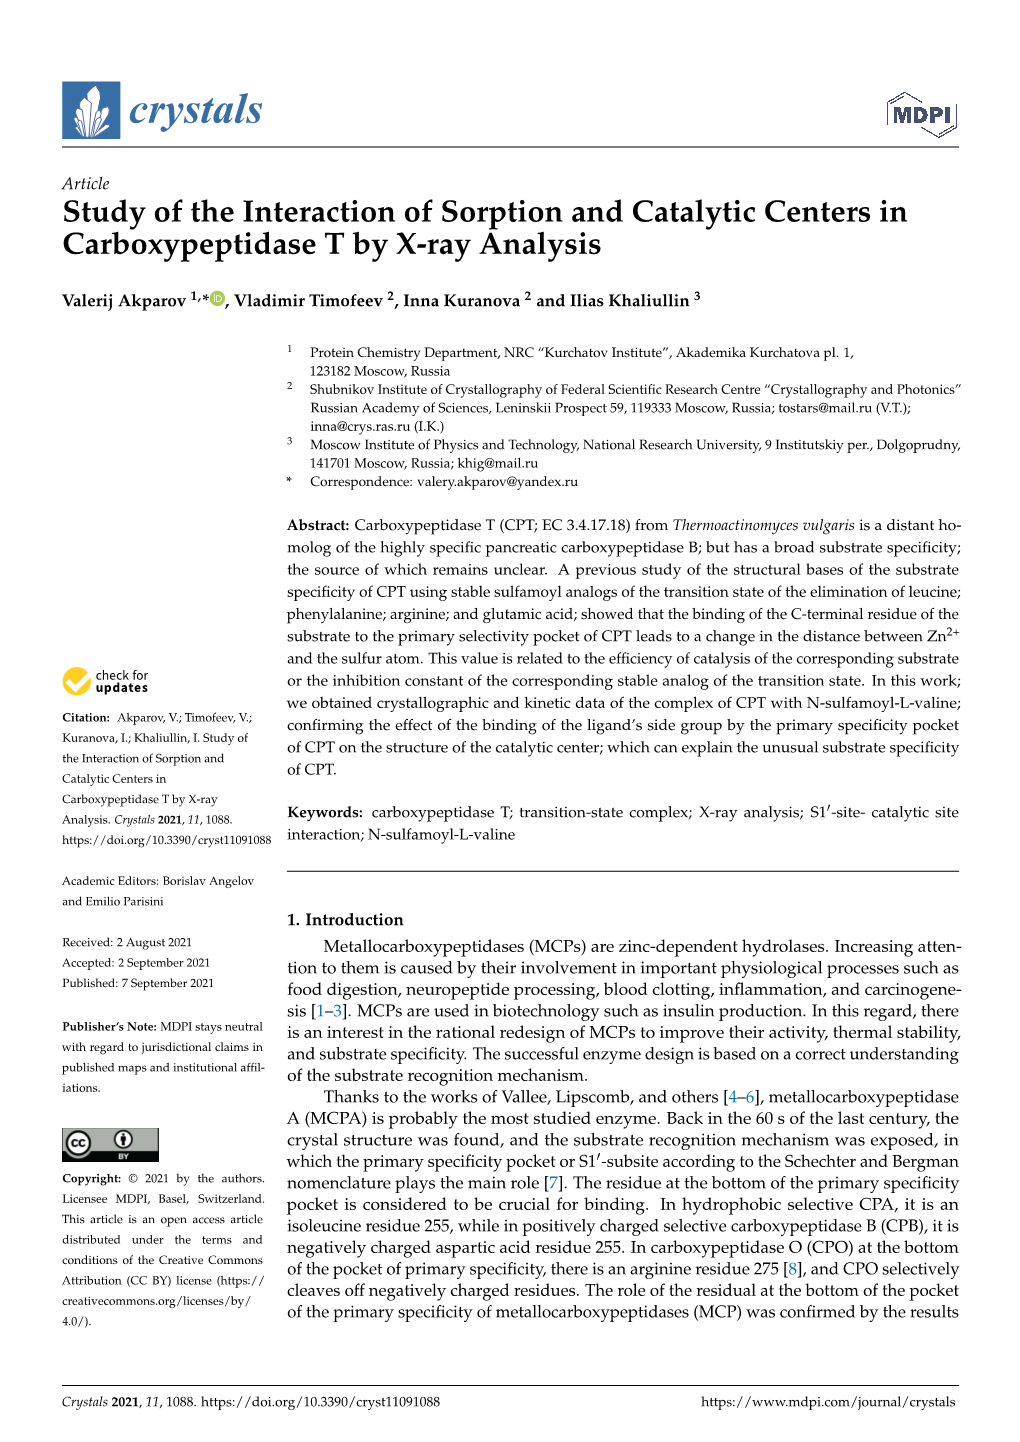 Study of the Interaction of Sorption and Catalytic Centers in Carboxypeptidase T by X-Ray Analysis